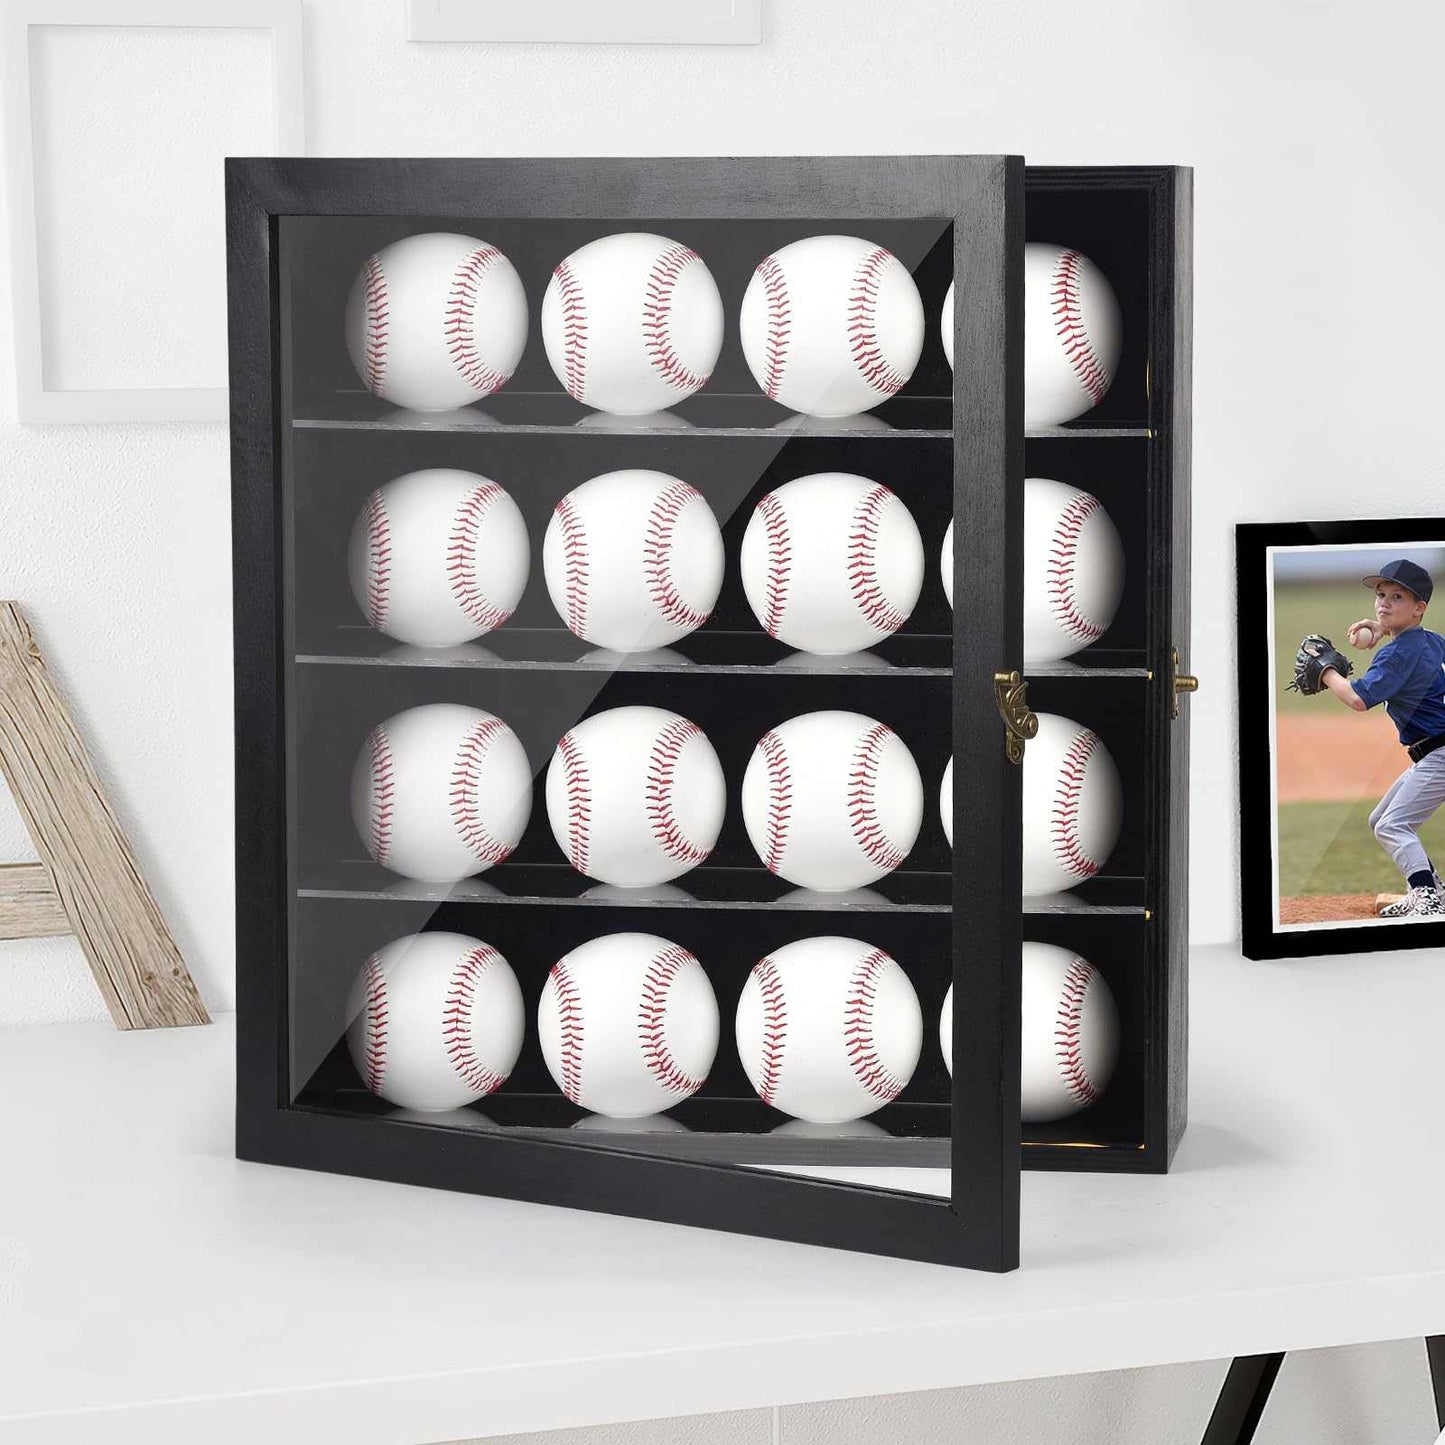 LED Clear Acrylic Baseball Display Case | UV Protected Wall-Mounted Holder for Autographed Memorabilia and Collectibles